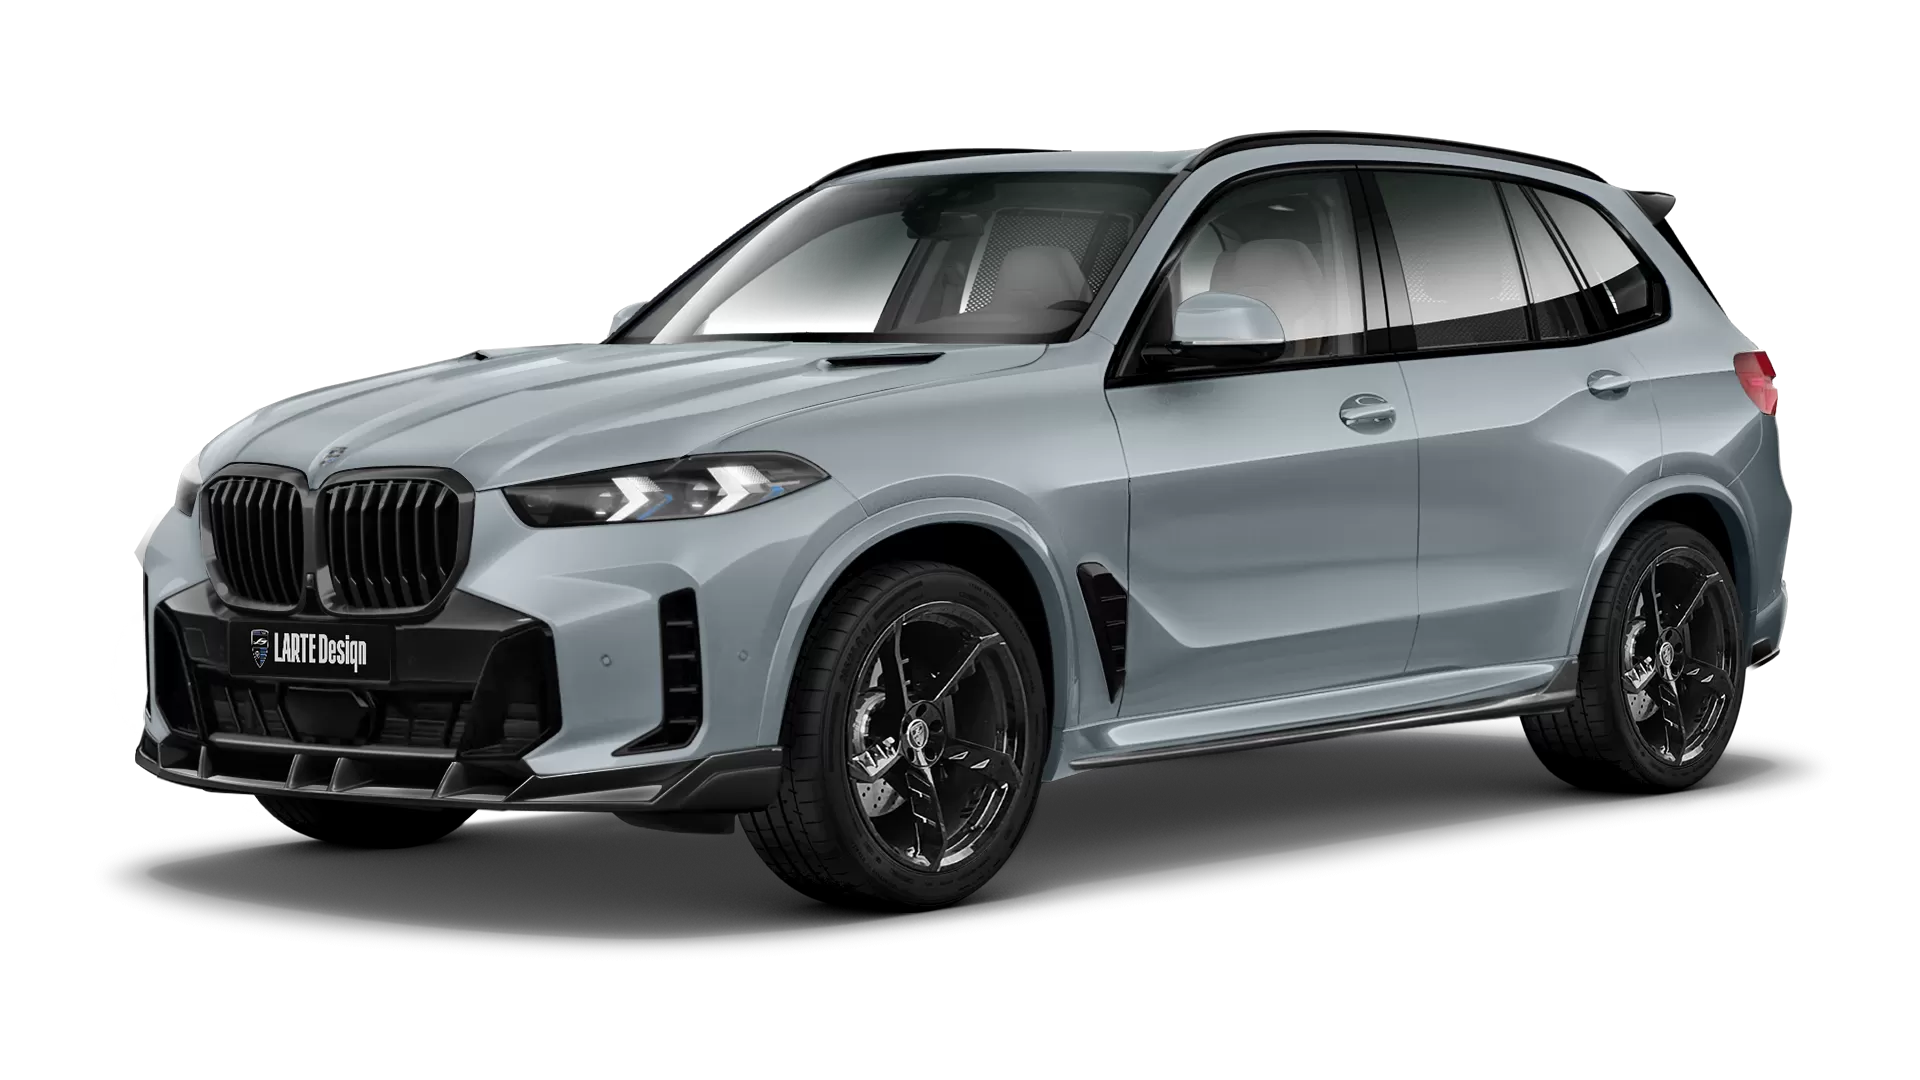 BMW X5 G05 LCI Facelift with painted body kit: front view shown in Frozen Pure Grey